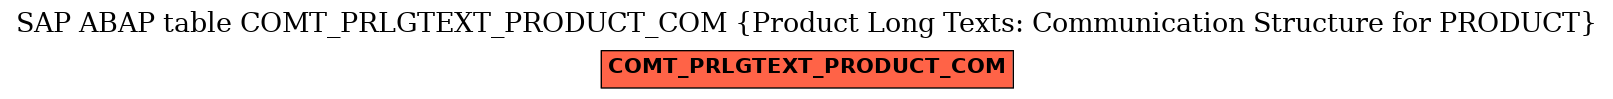 E-R Diagram for table COMT_PRLGTEXT_PRODUCT_COM (Product Long Texts: Communication Structure for PRODUCT)